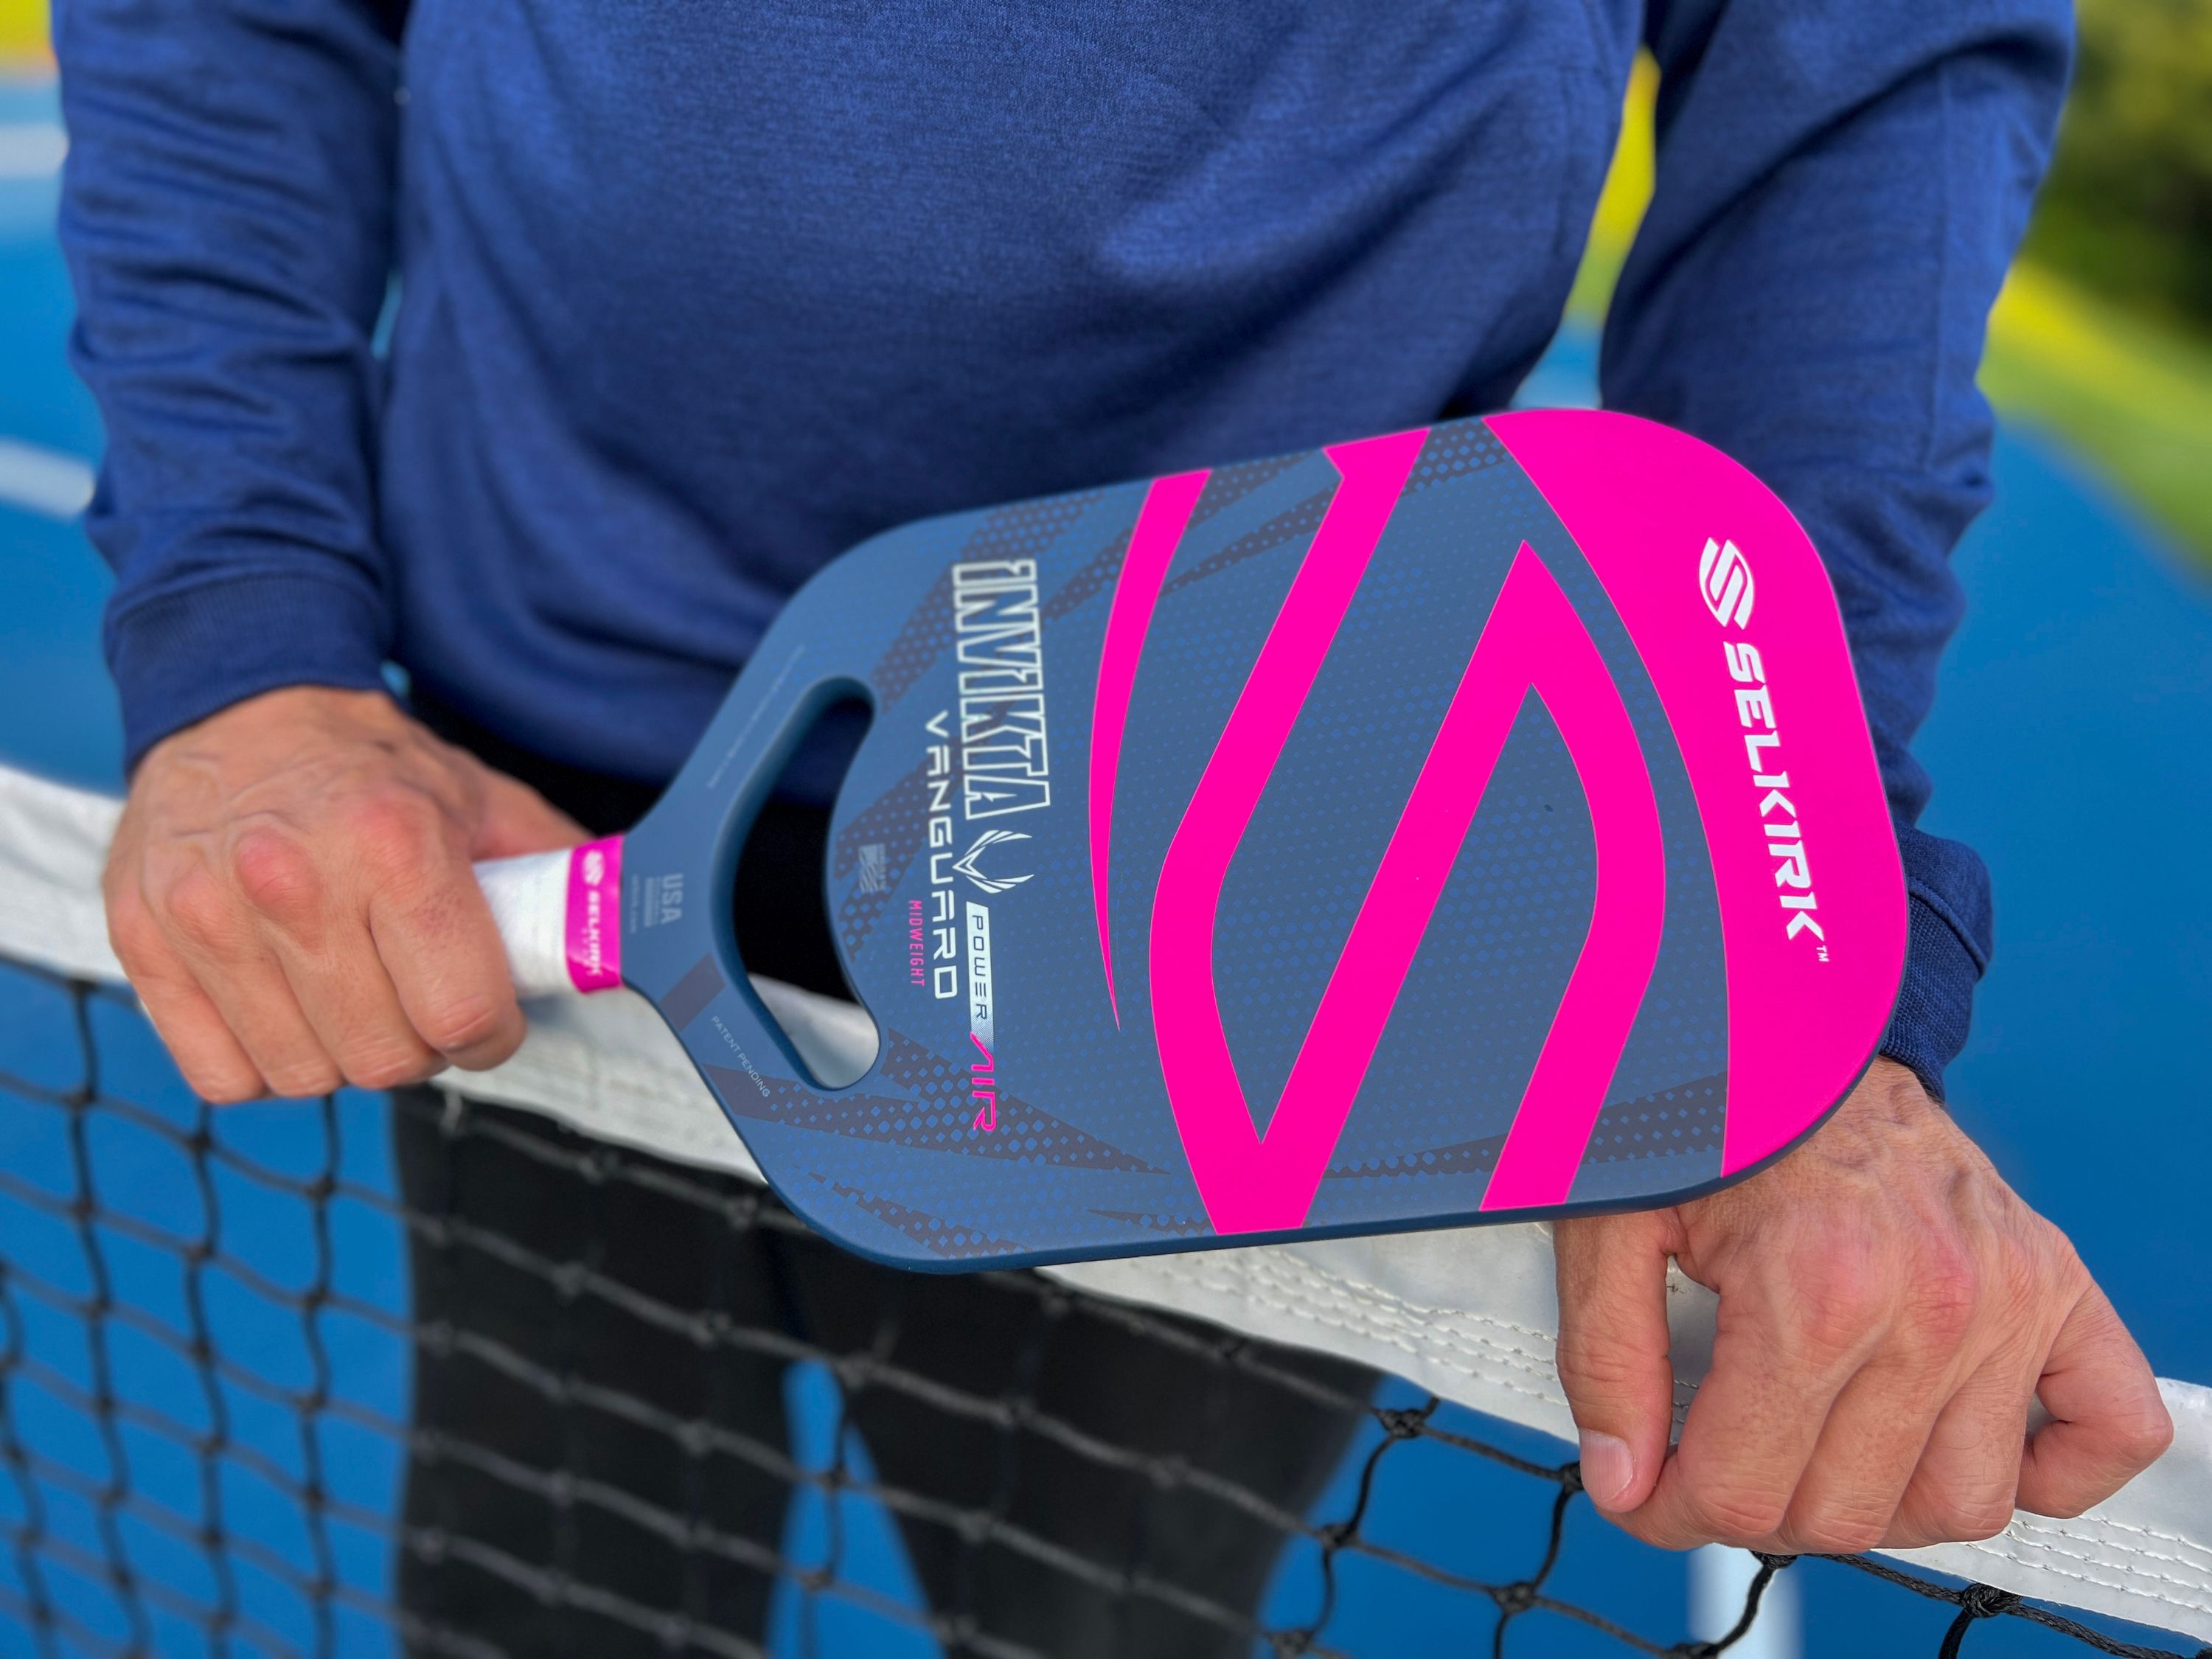 USA Pickleball and their Equipment Evaluation Committee (EEC) have created the standard for pickleball paddles to be used in official USA Pickleball play.